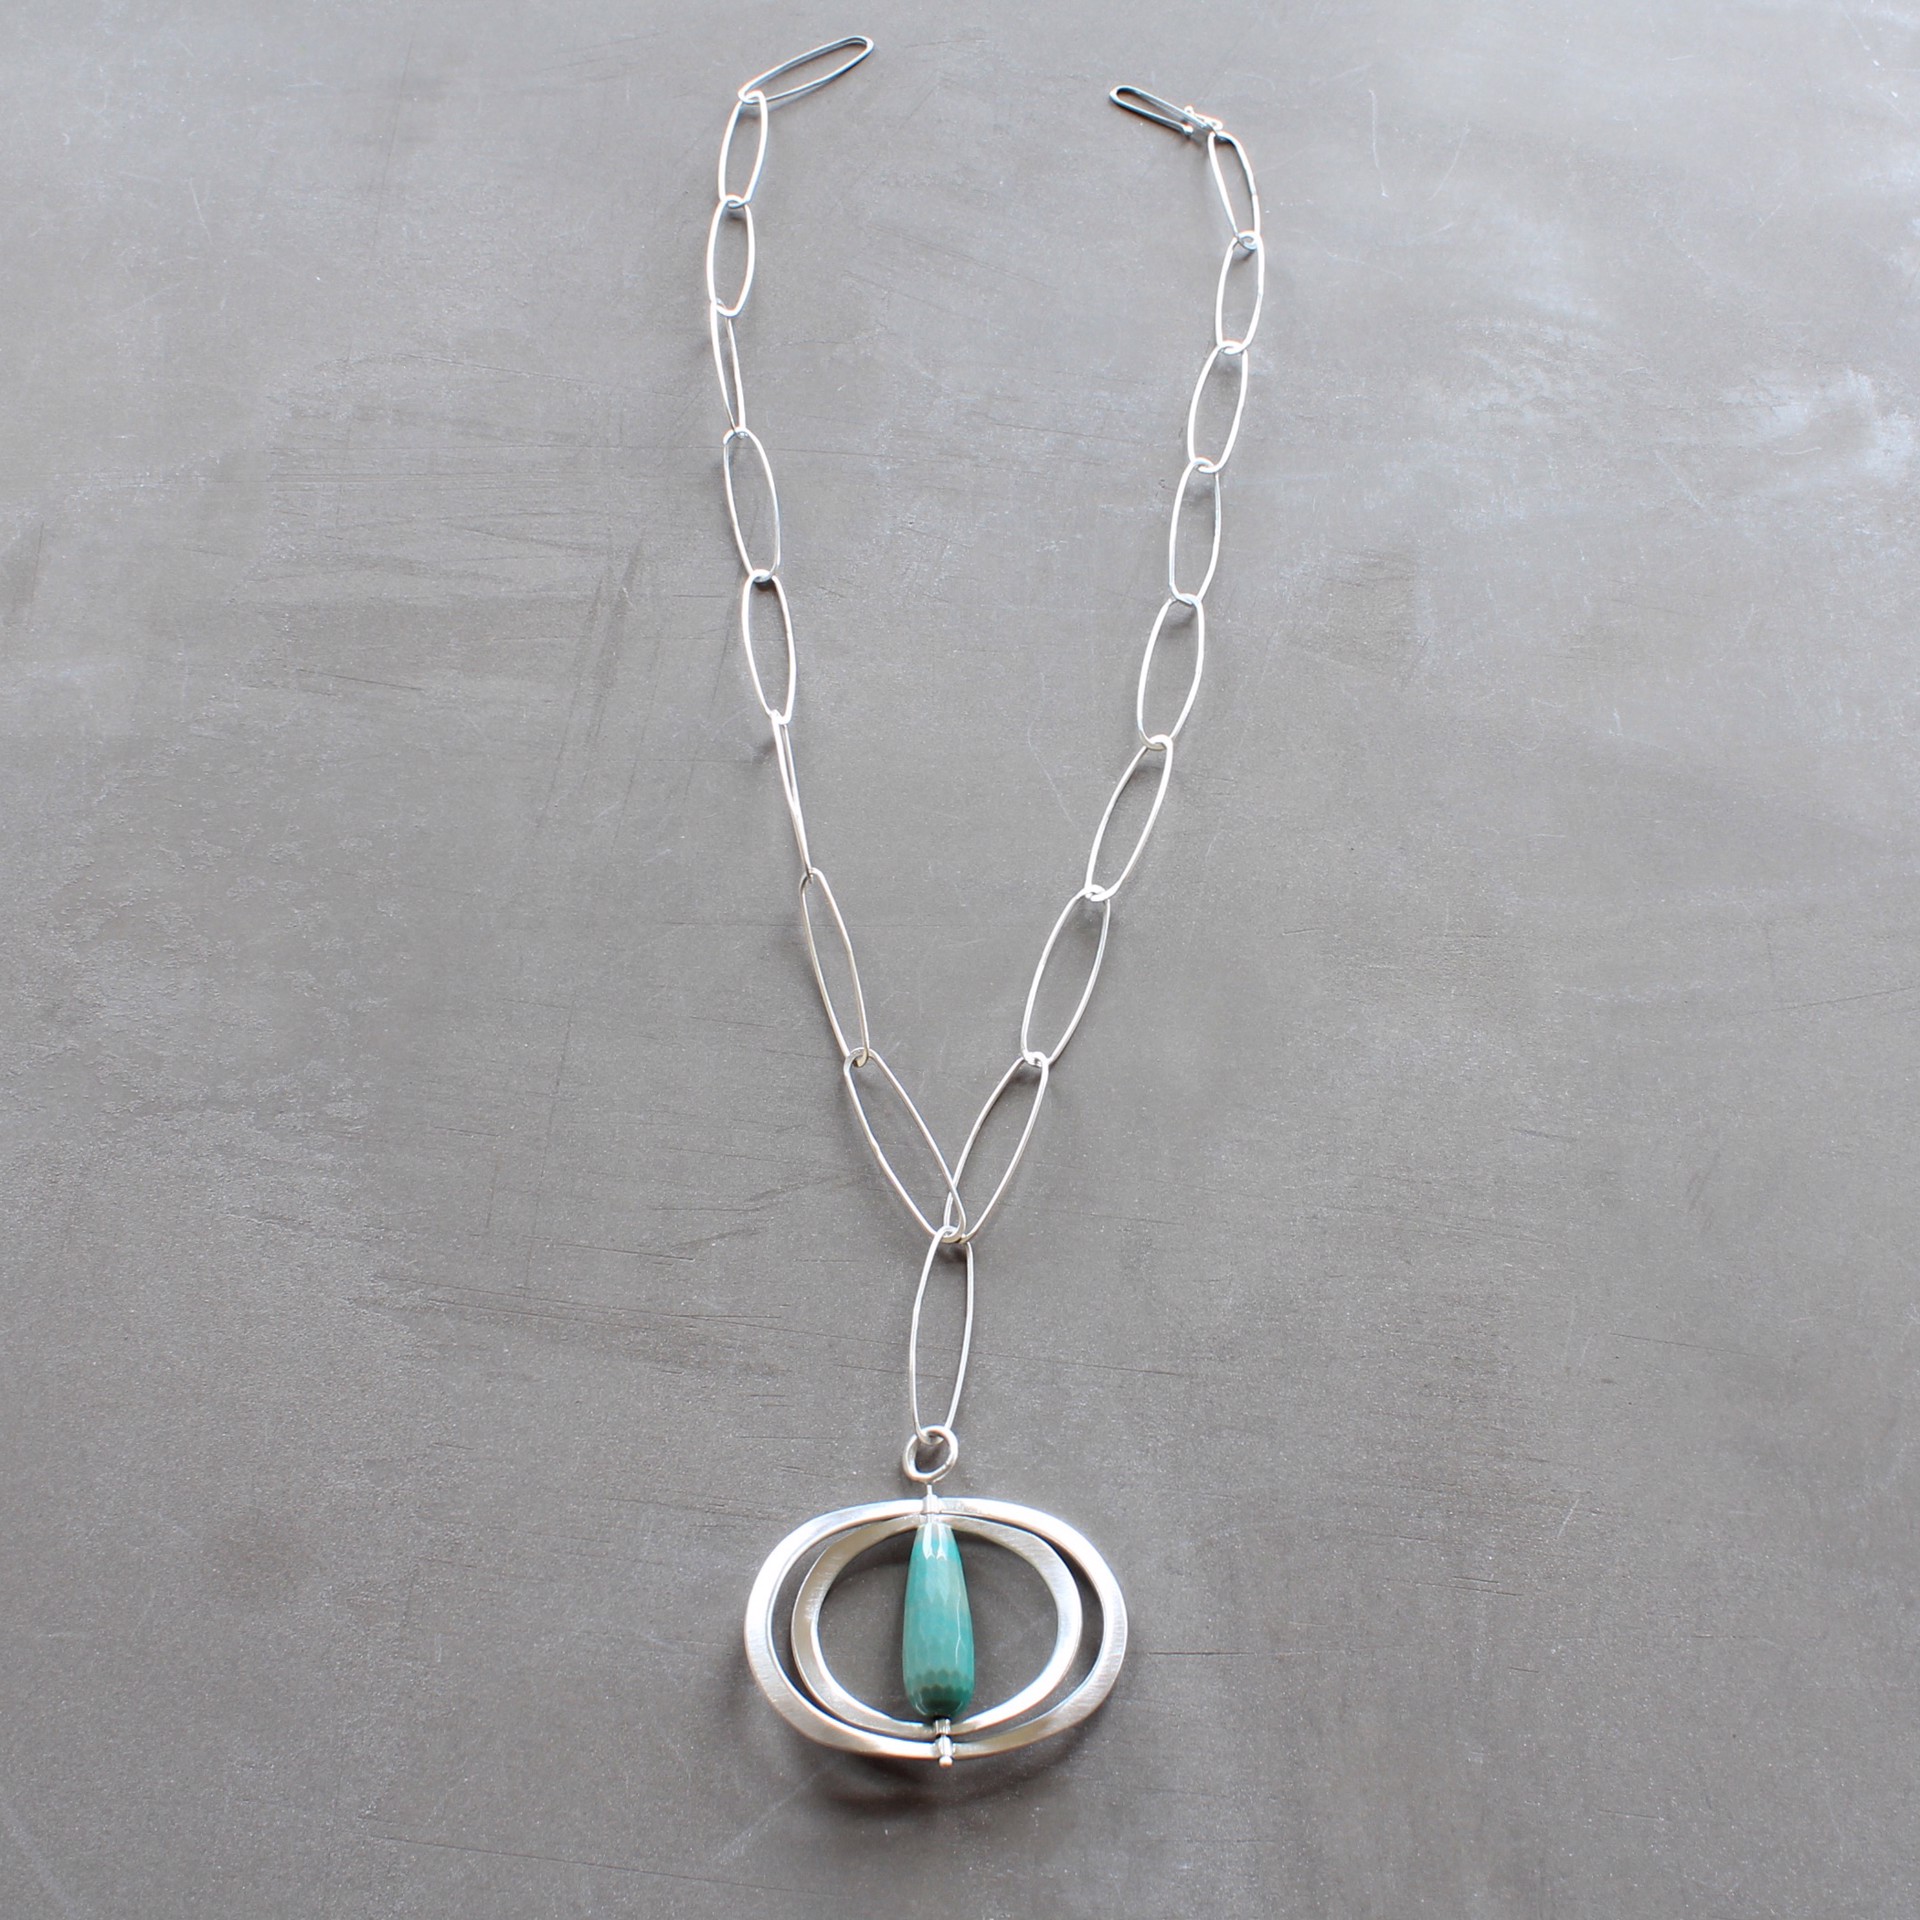 Turquoise + Kenetic Necklace by Audrey Laine